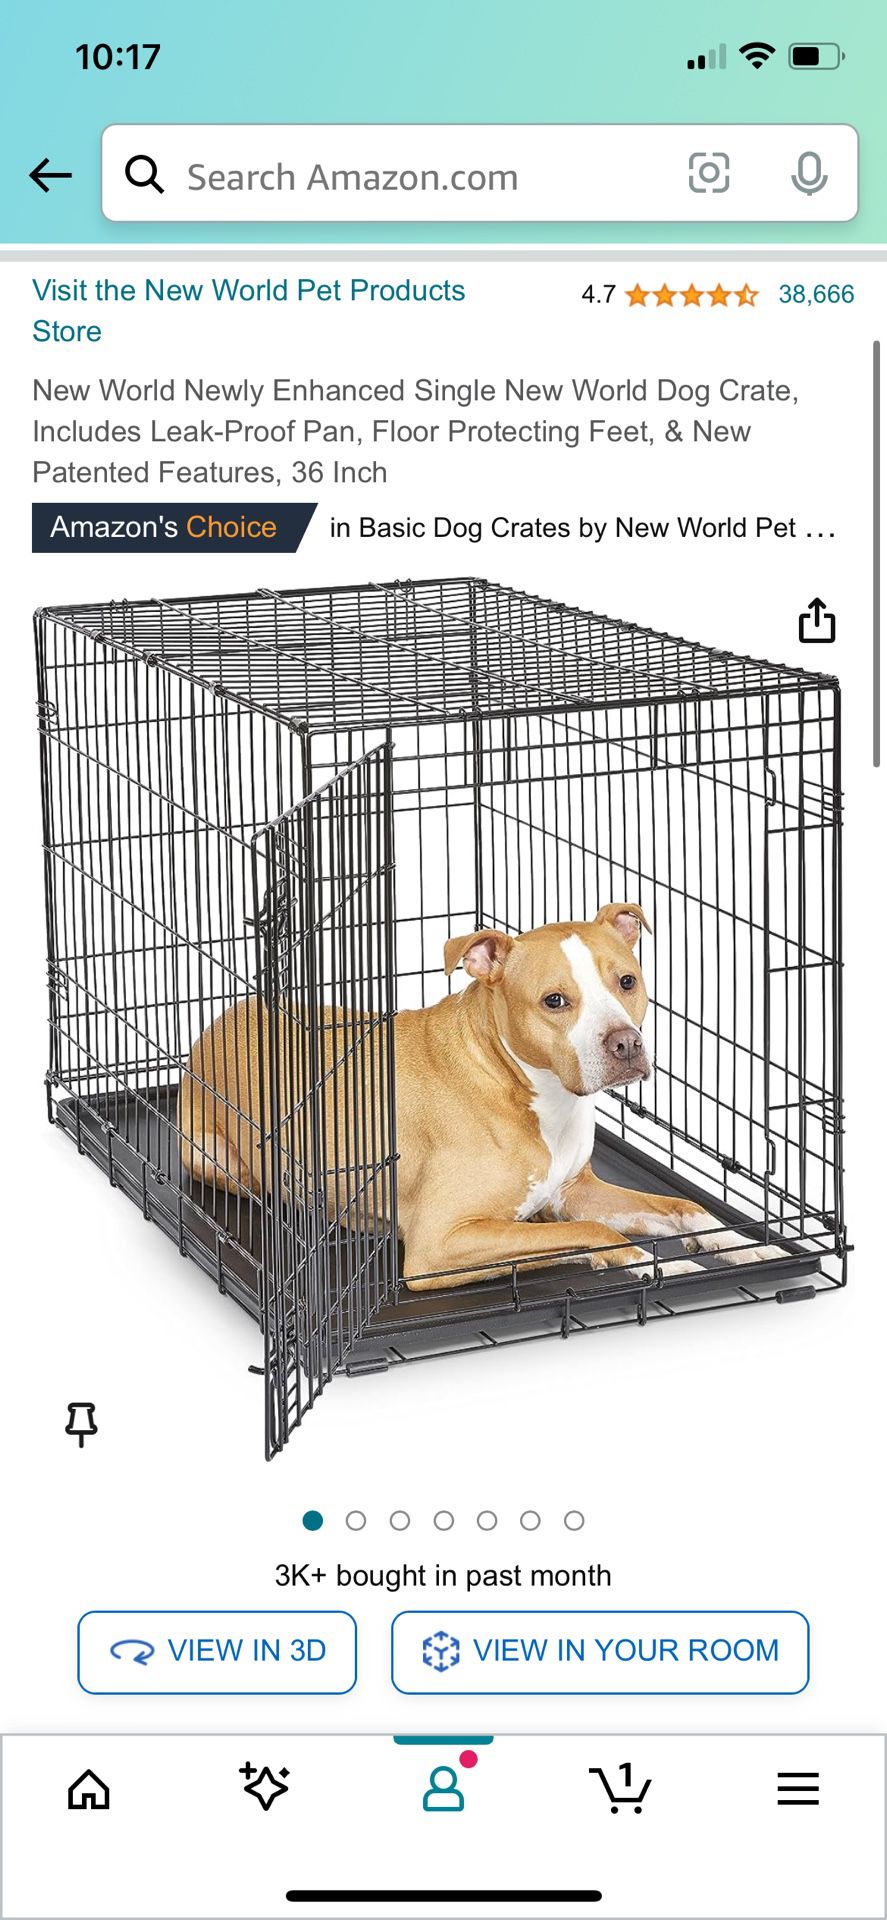 Dog Crate, Includes Leak-Proof Pan, Floor Protecting Feet, & New Patented Features, 36 Inch